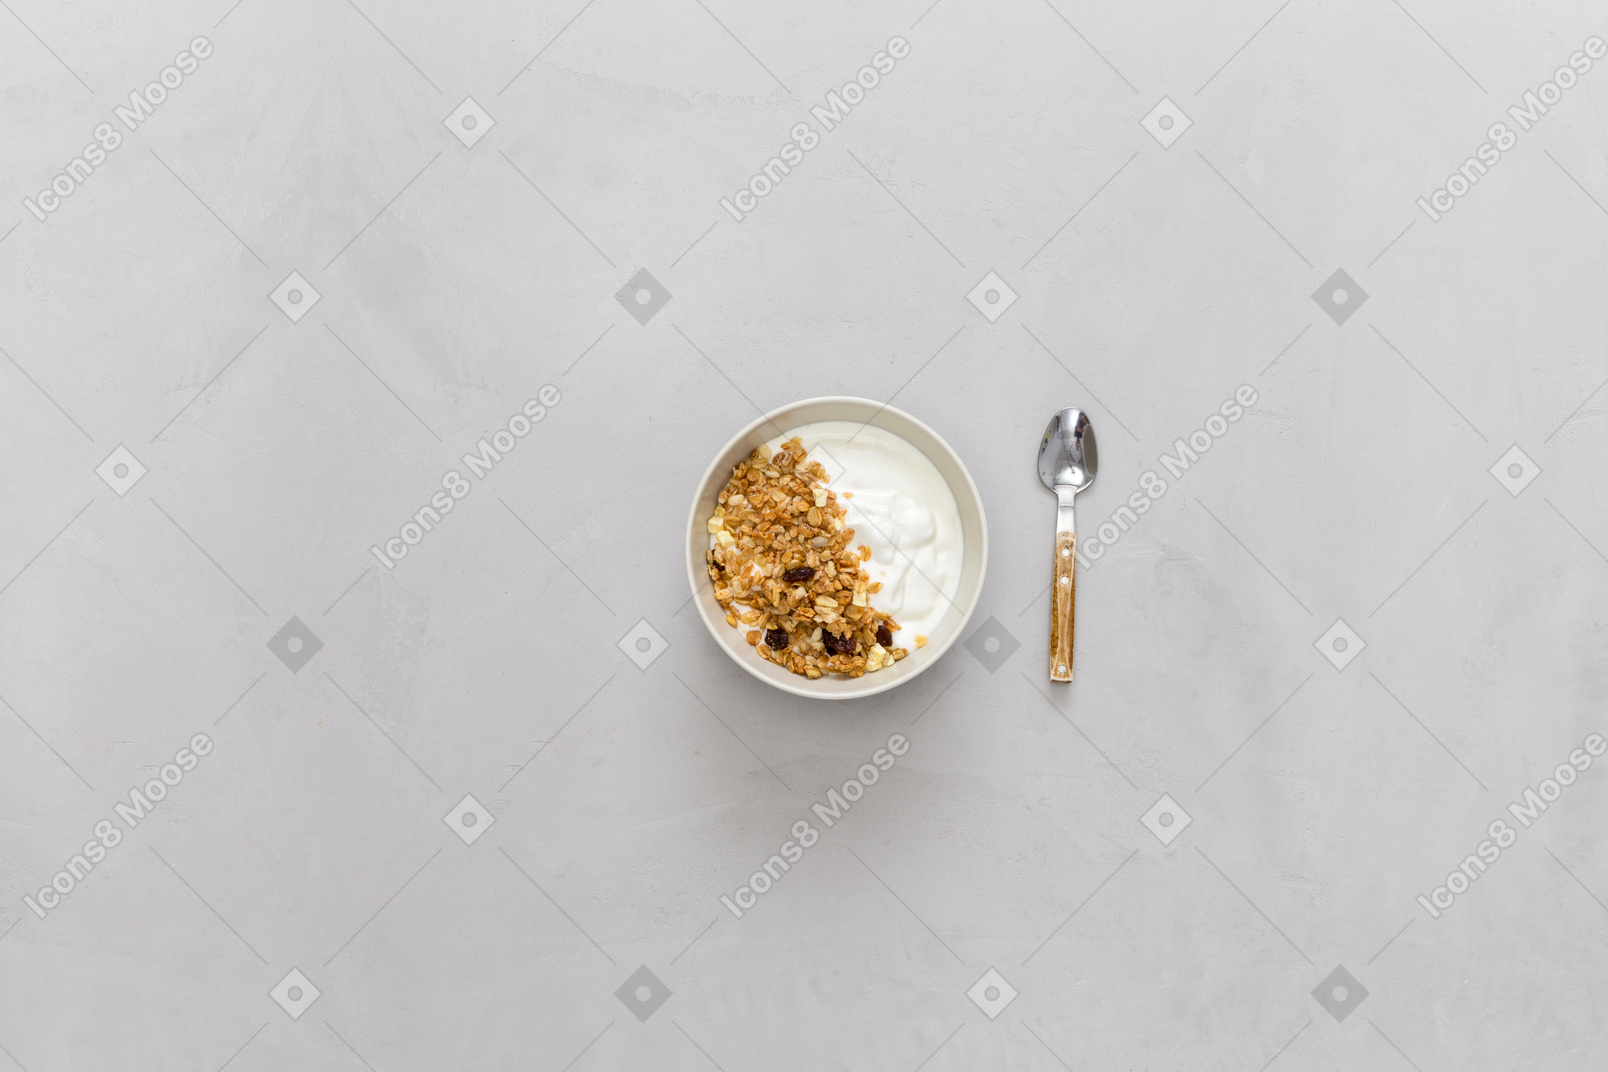 A bowl of cereals with yoghurt